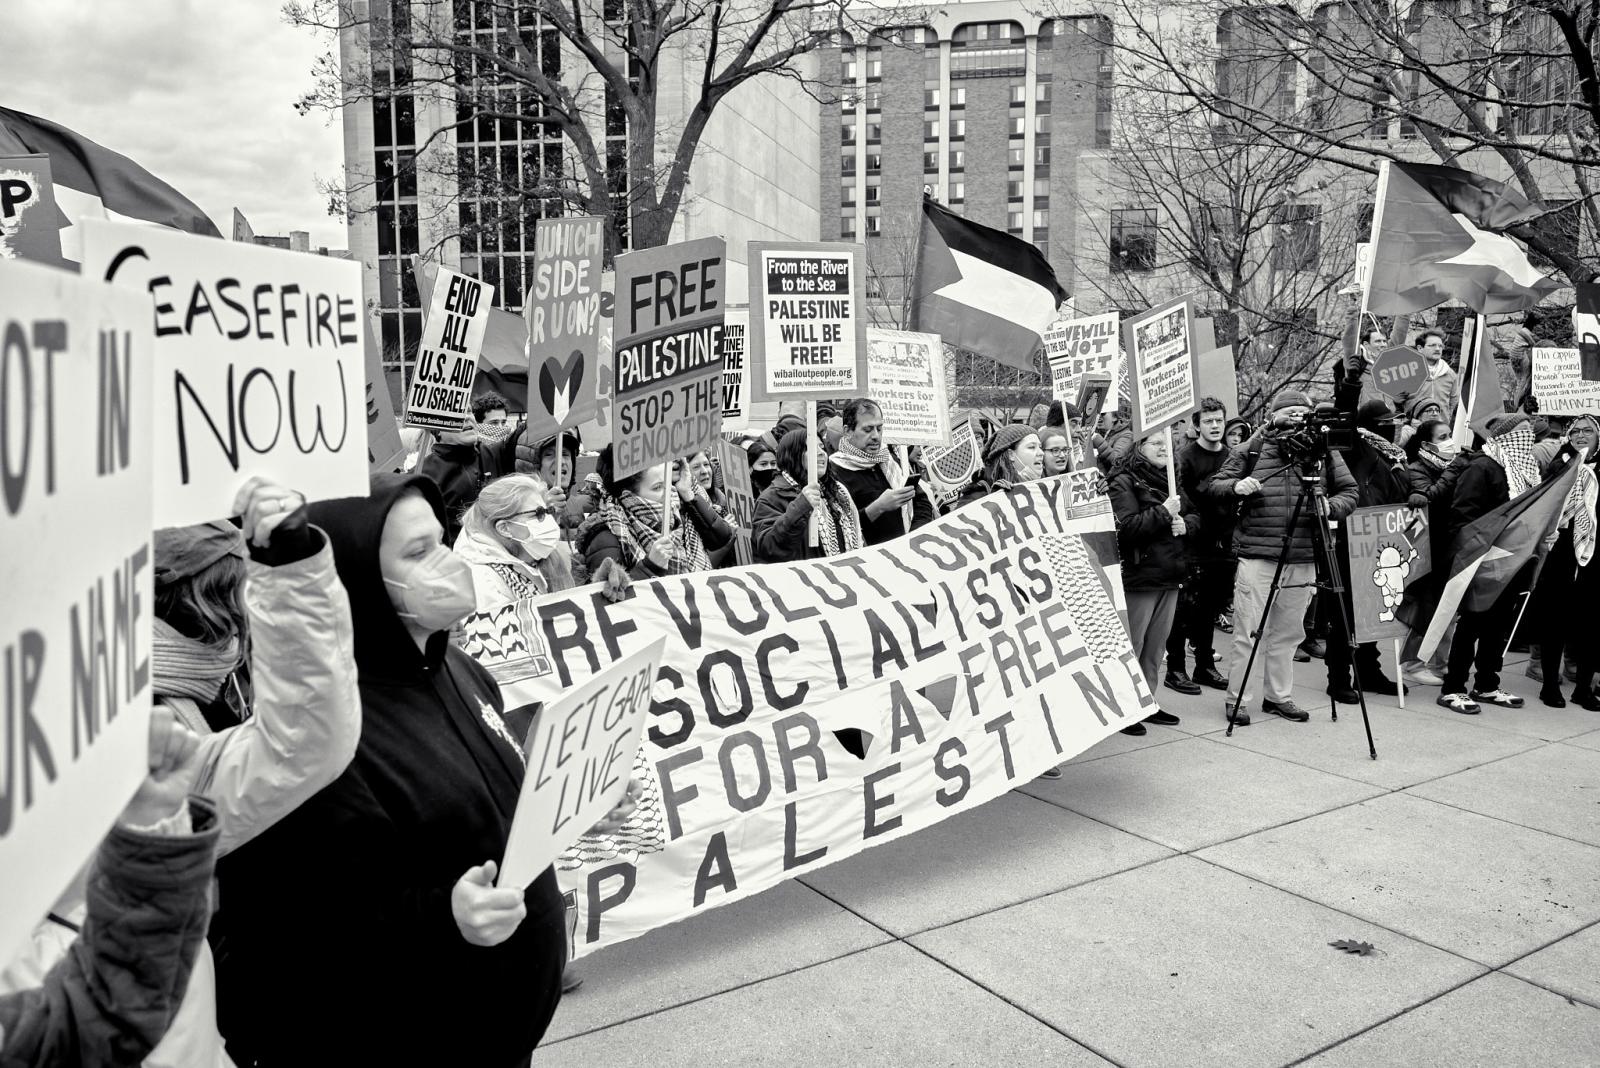 Wisconsin All out for Palestine Rally and March -   